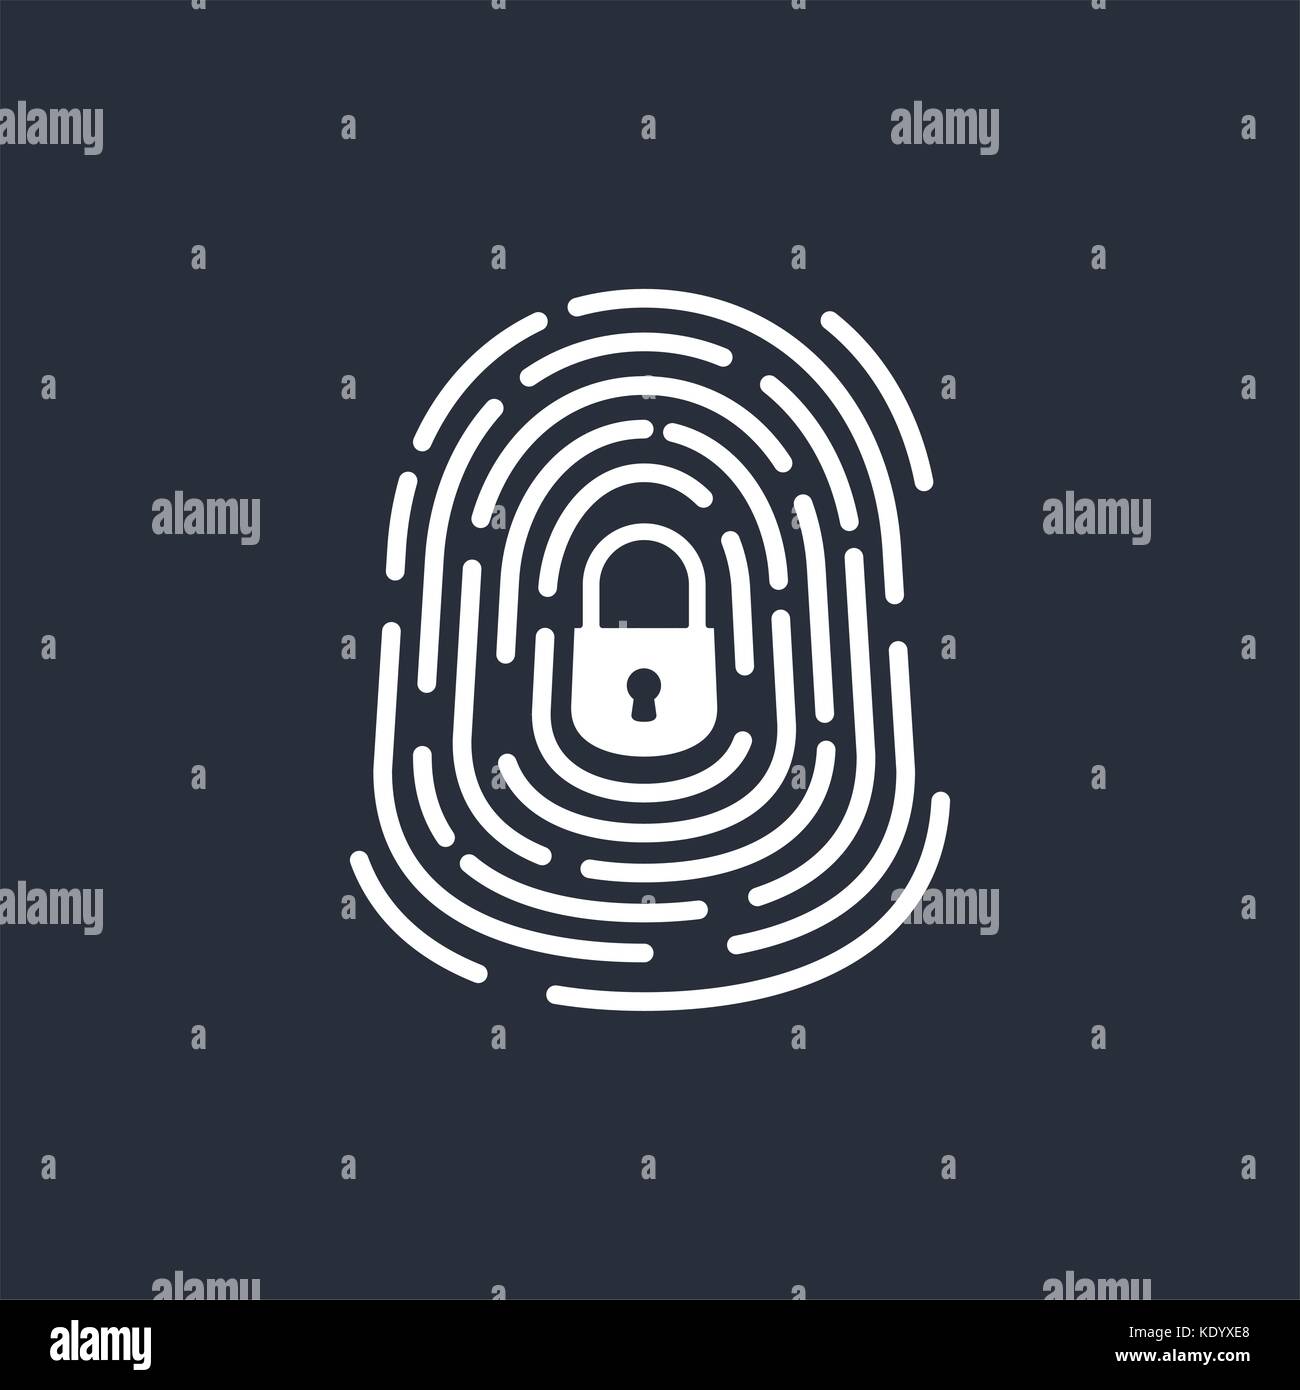 Fngerprint with icon with lock glyph inside - safe access Stock Vector